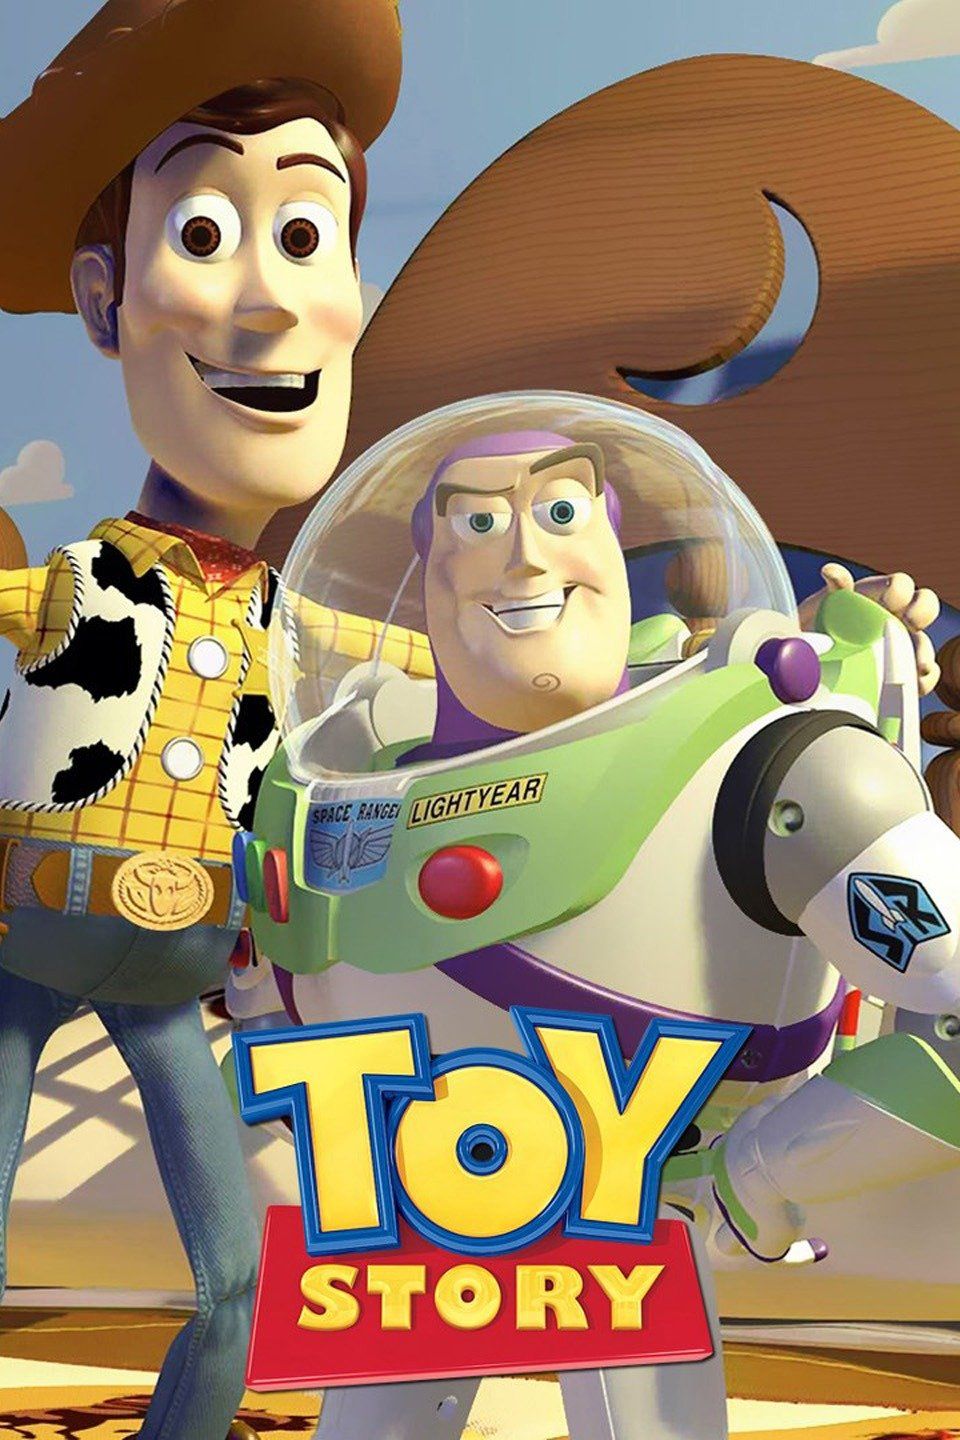 About Toy Story - Steemit.